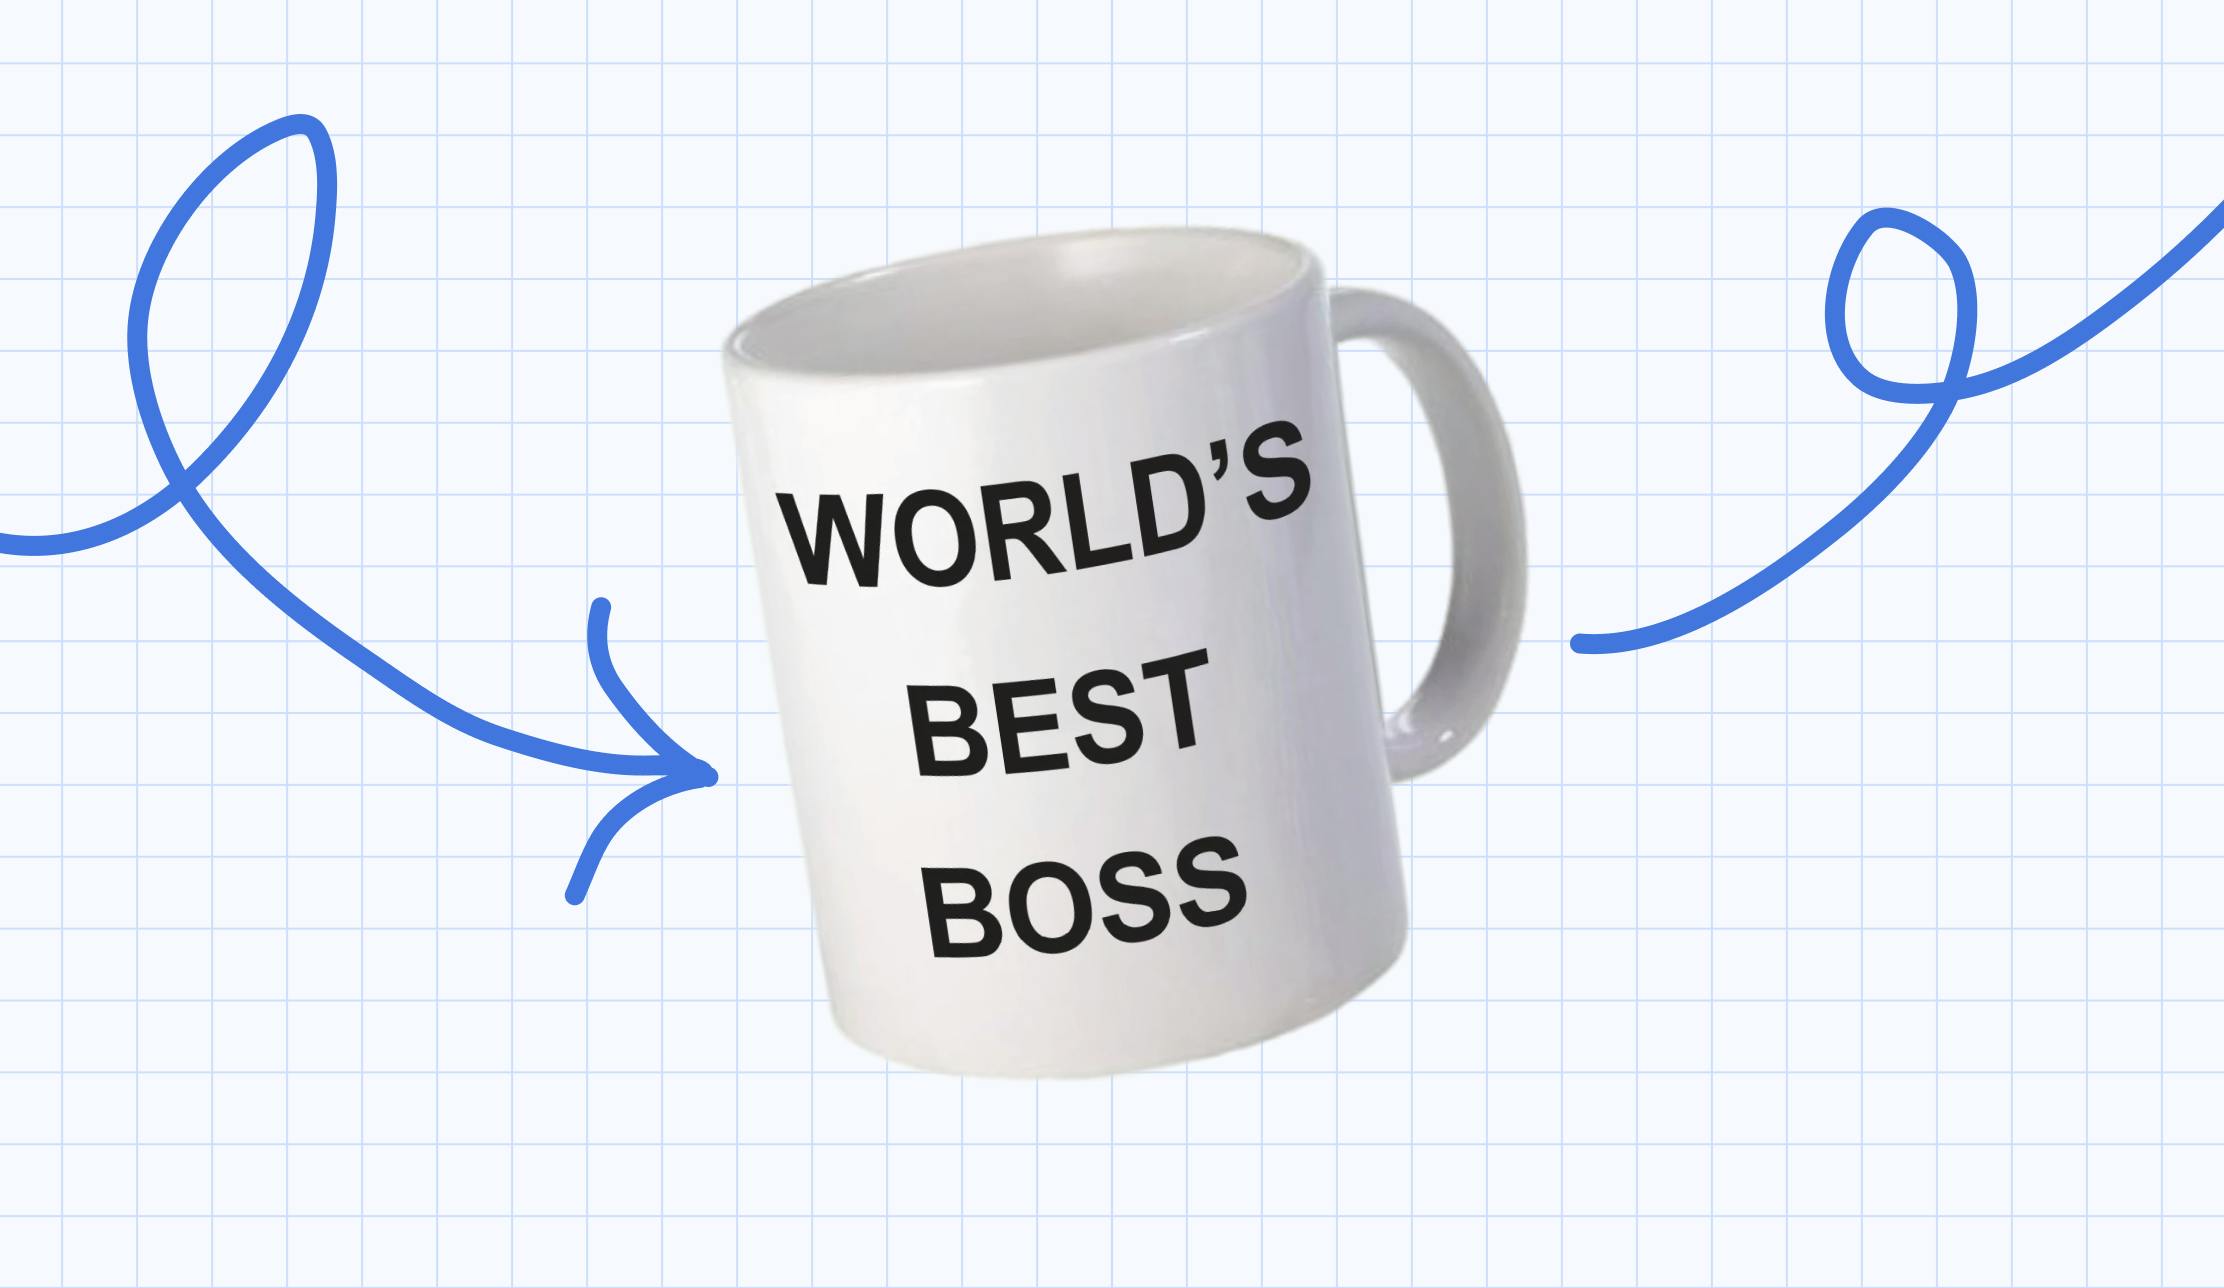 Mug with the words "World's best boss" written on the front.